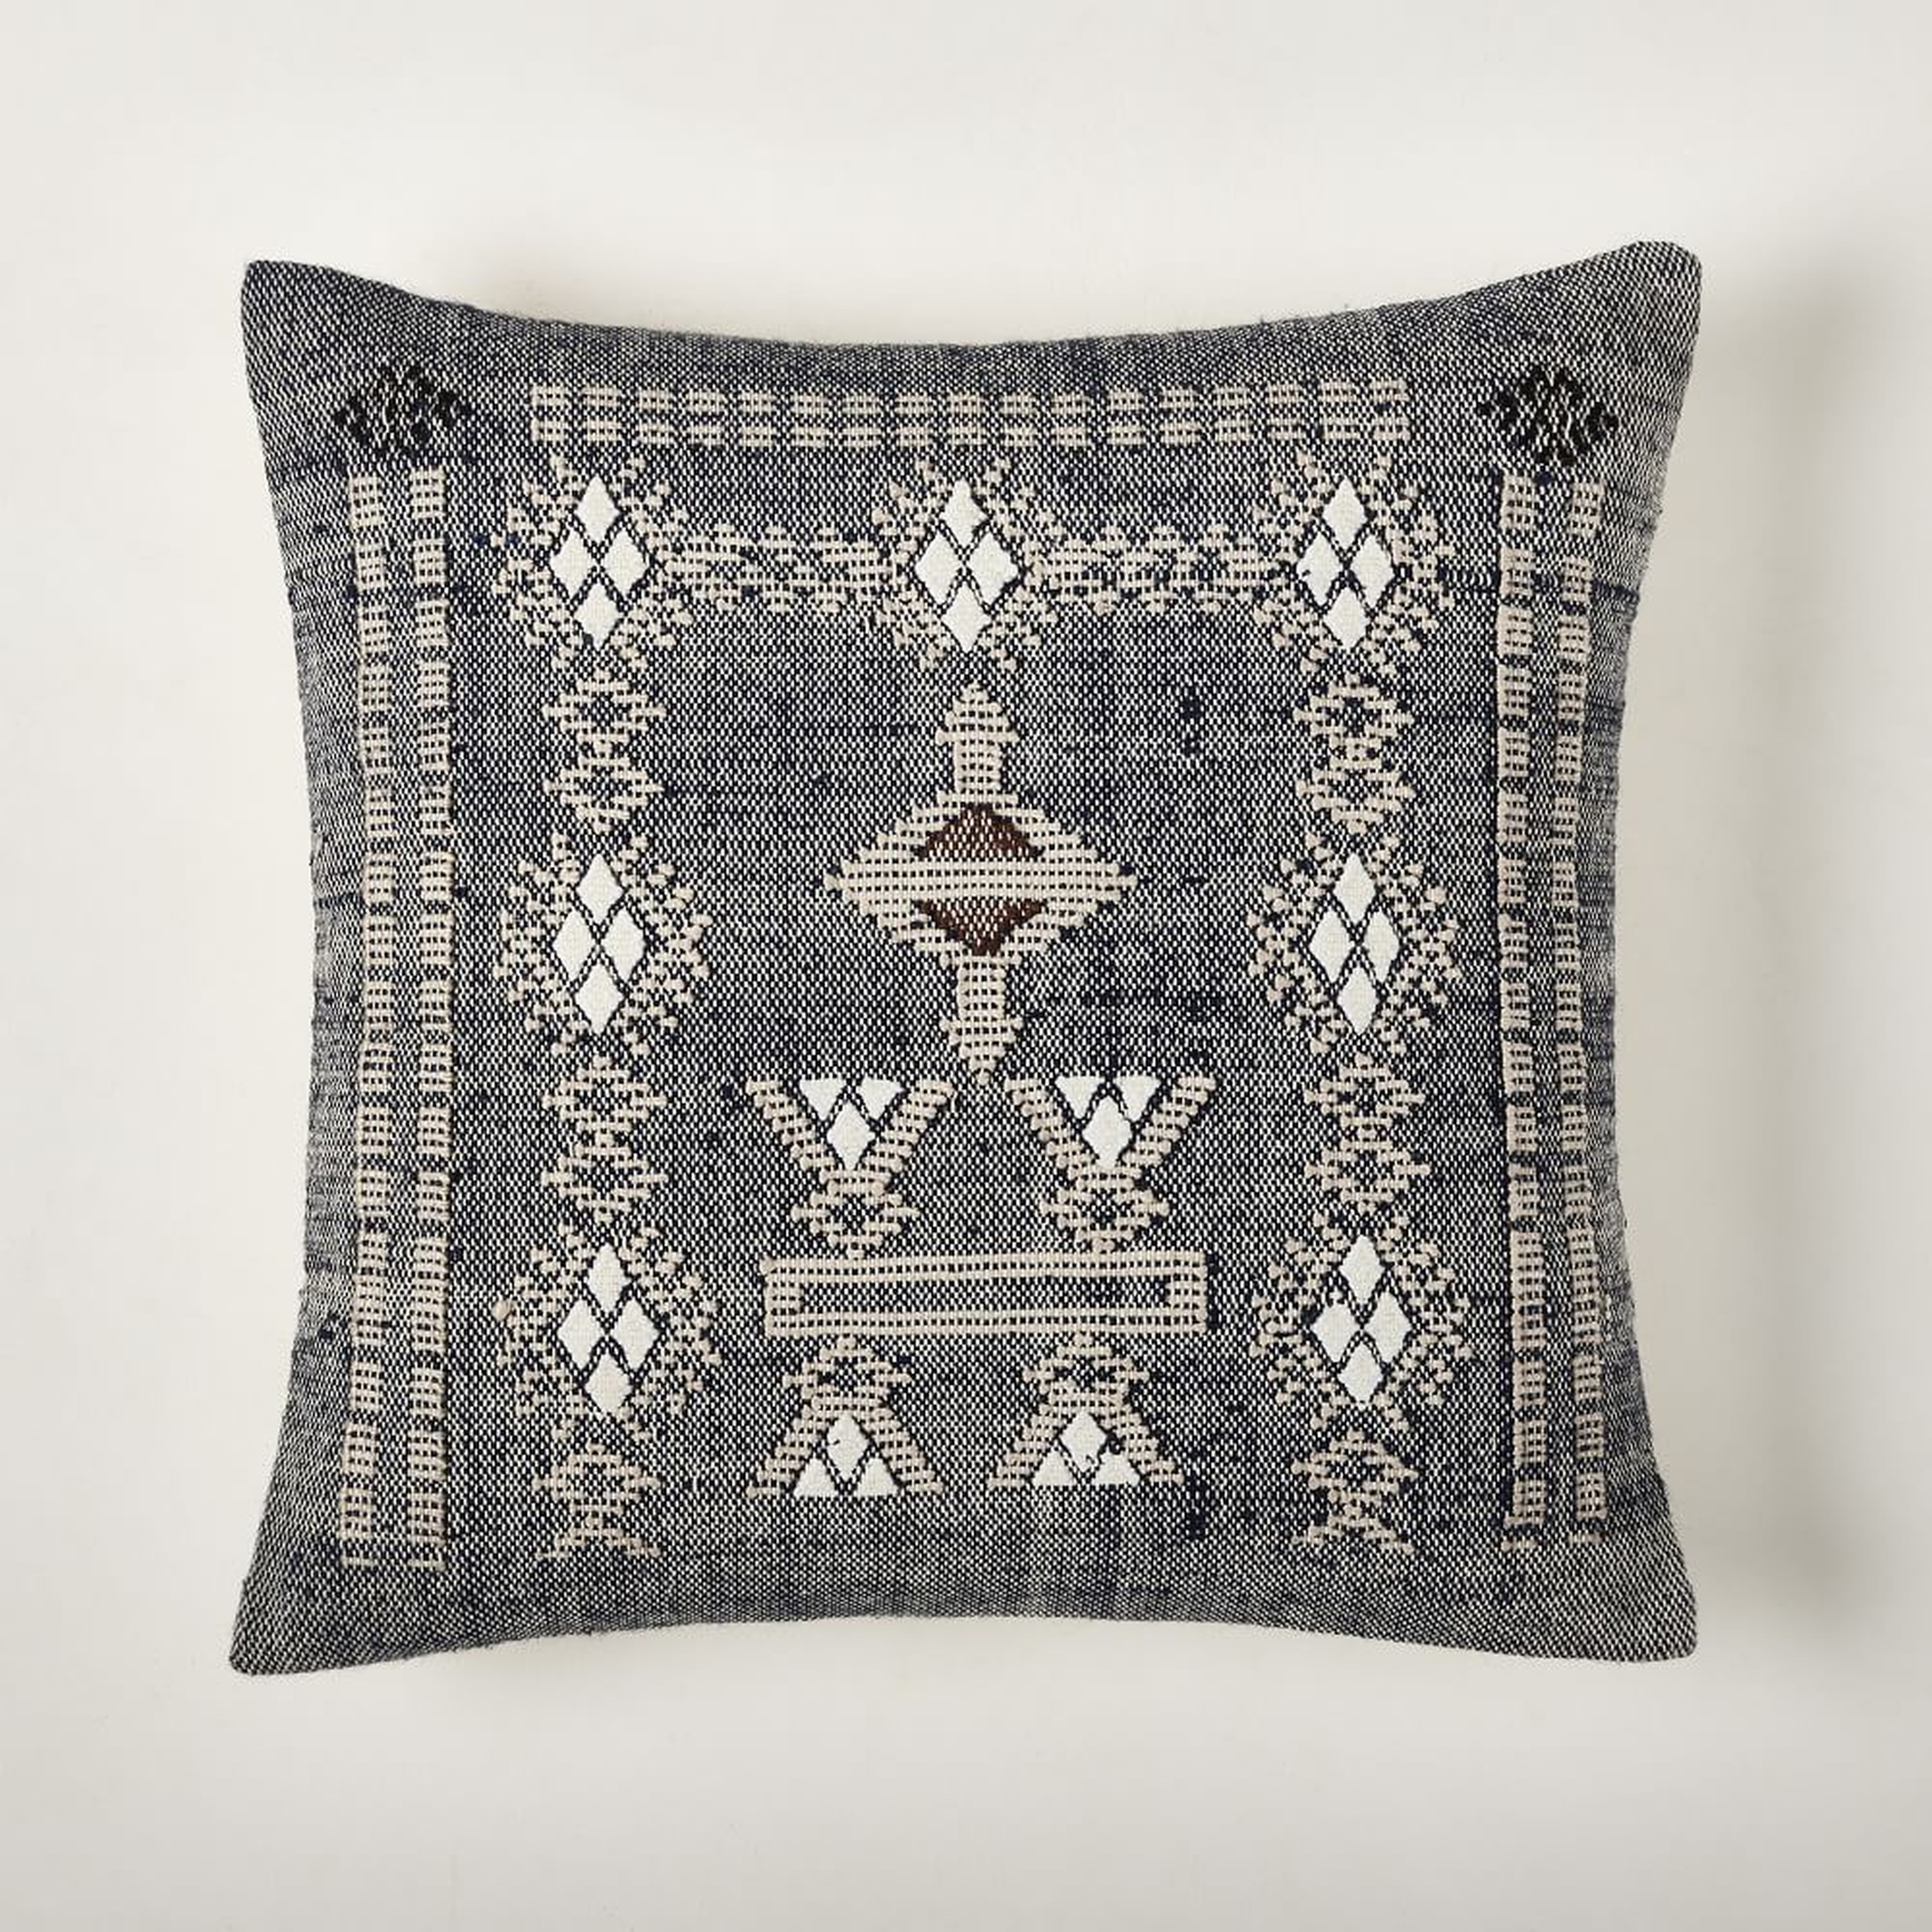 Framed Moroccan Woven Pillow Cover, 20"x20", Midnight - West Elm